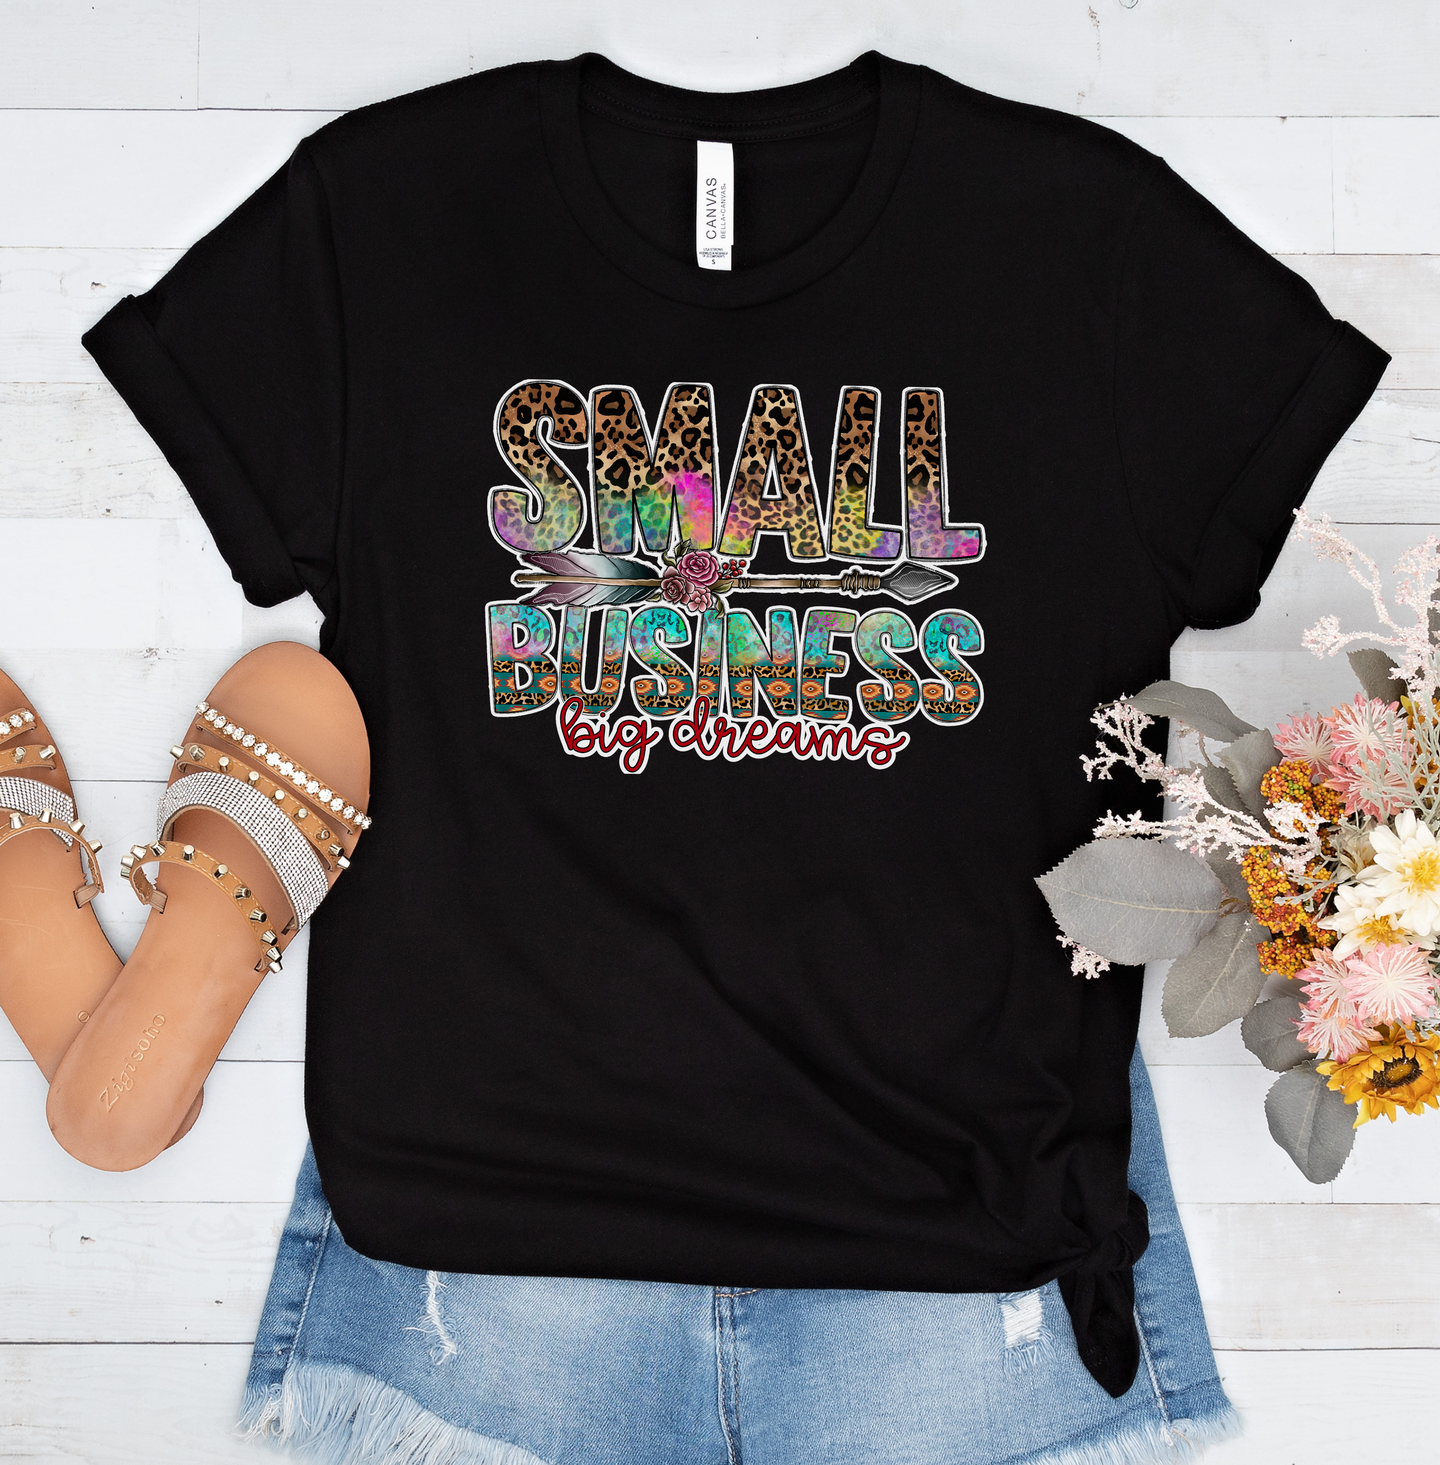 Small Business Big Dreams Graphic T-Shirt